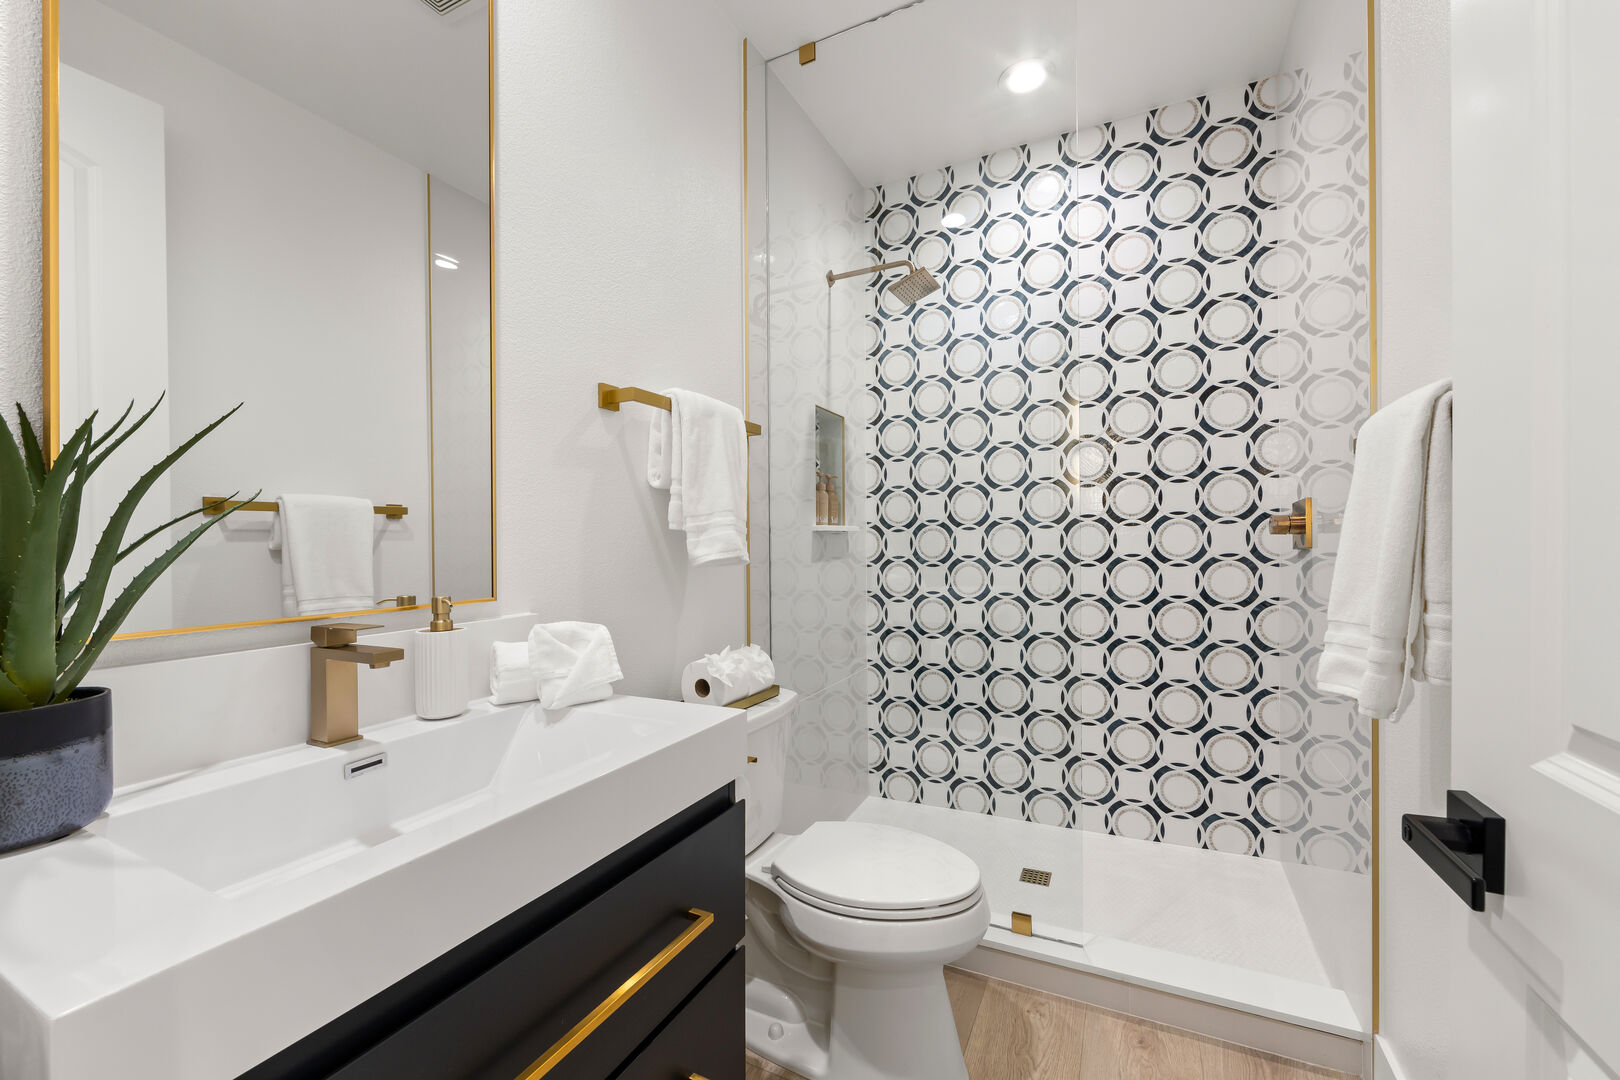 Hallway Bathroom Four is next to the laundry room and features a step-in tile shower with a decorative vanity sink. This bathroom features a fun geometric tile shower and gold accent hardware.